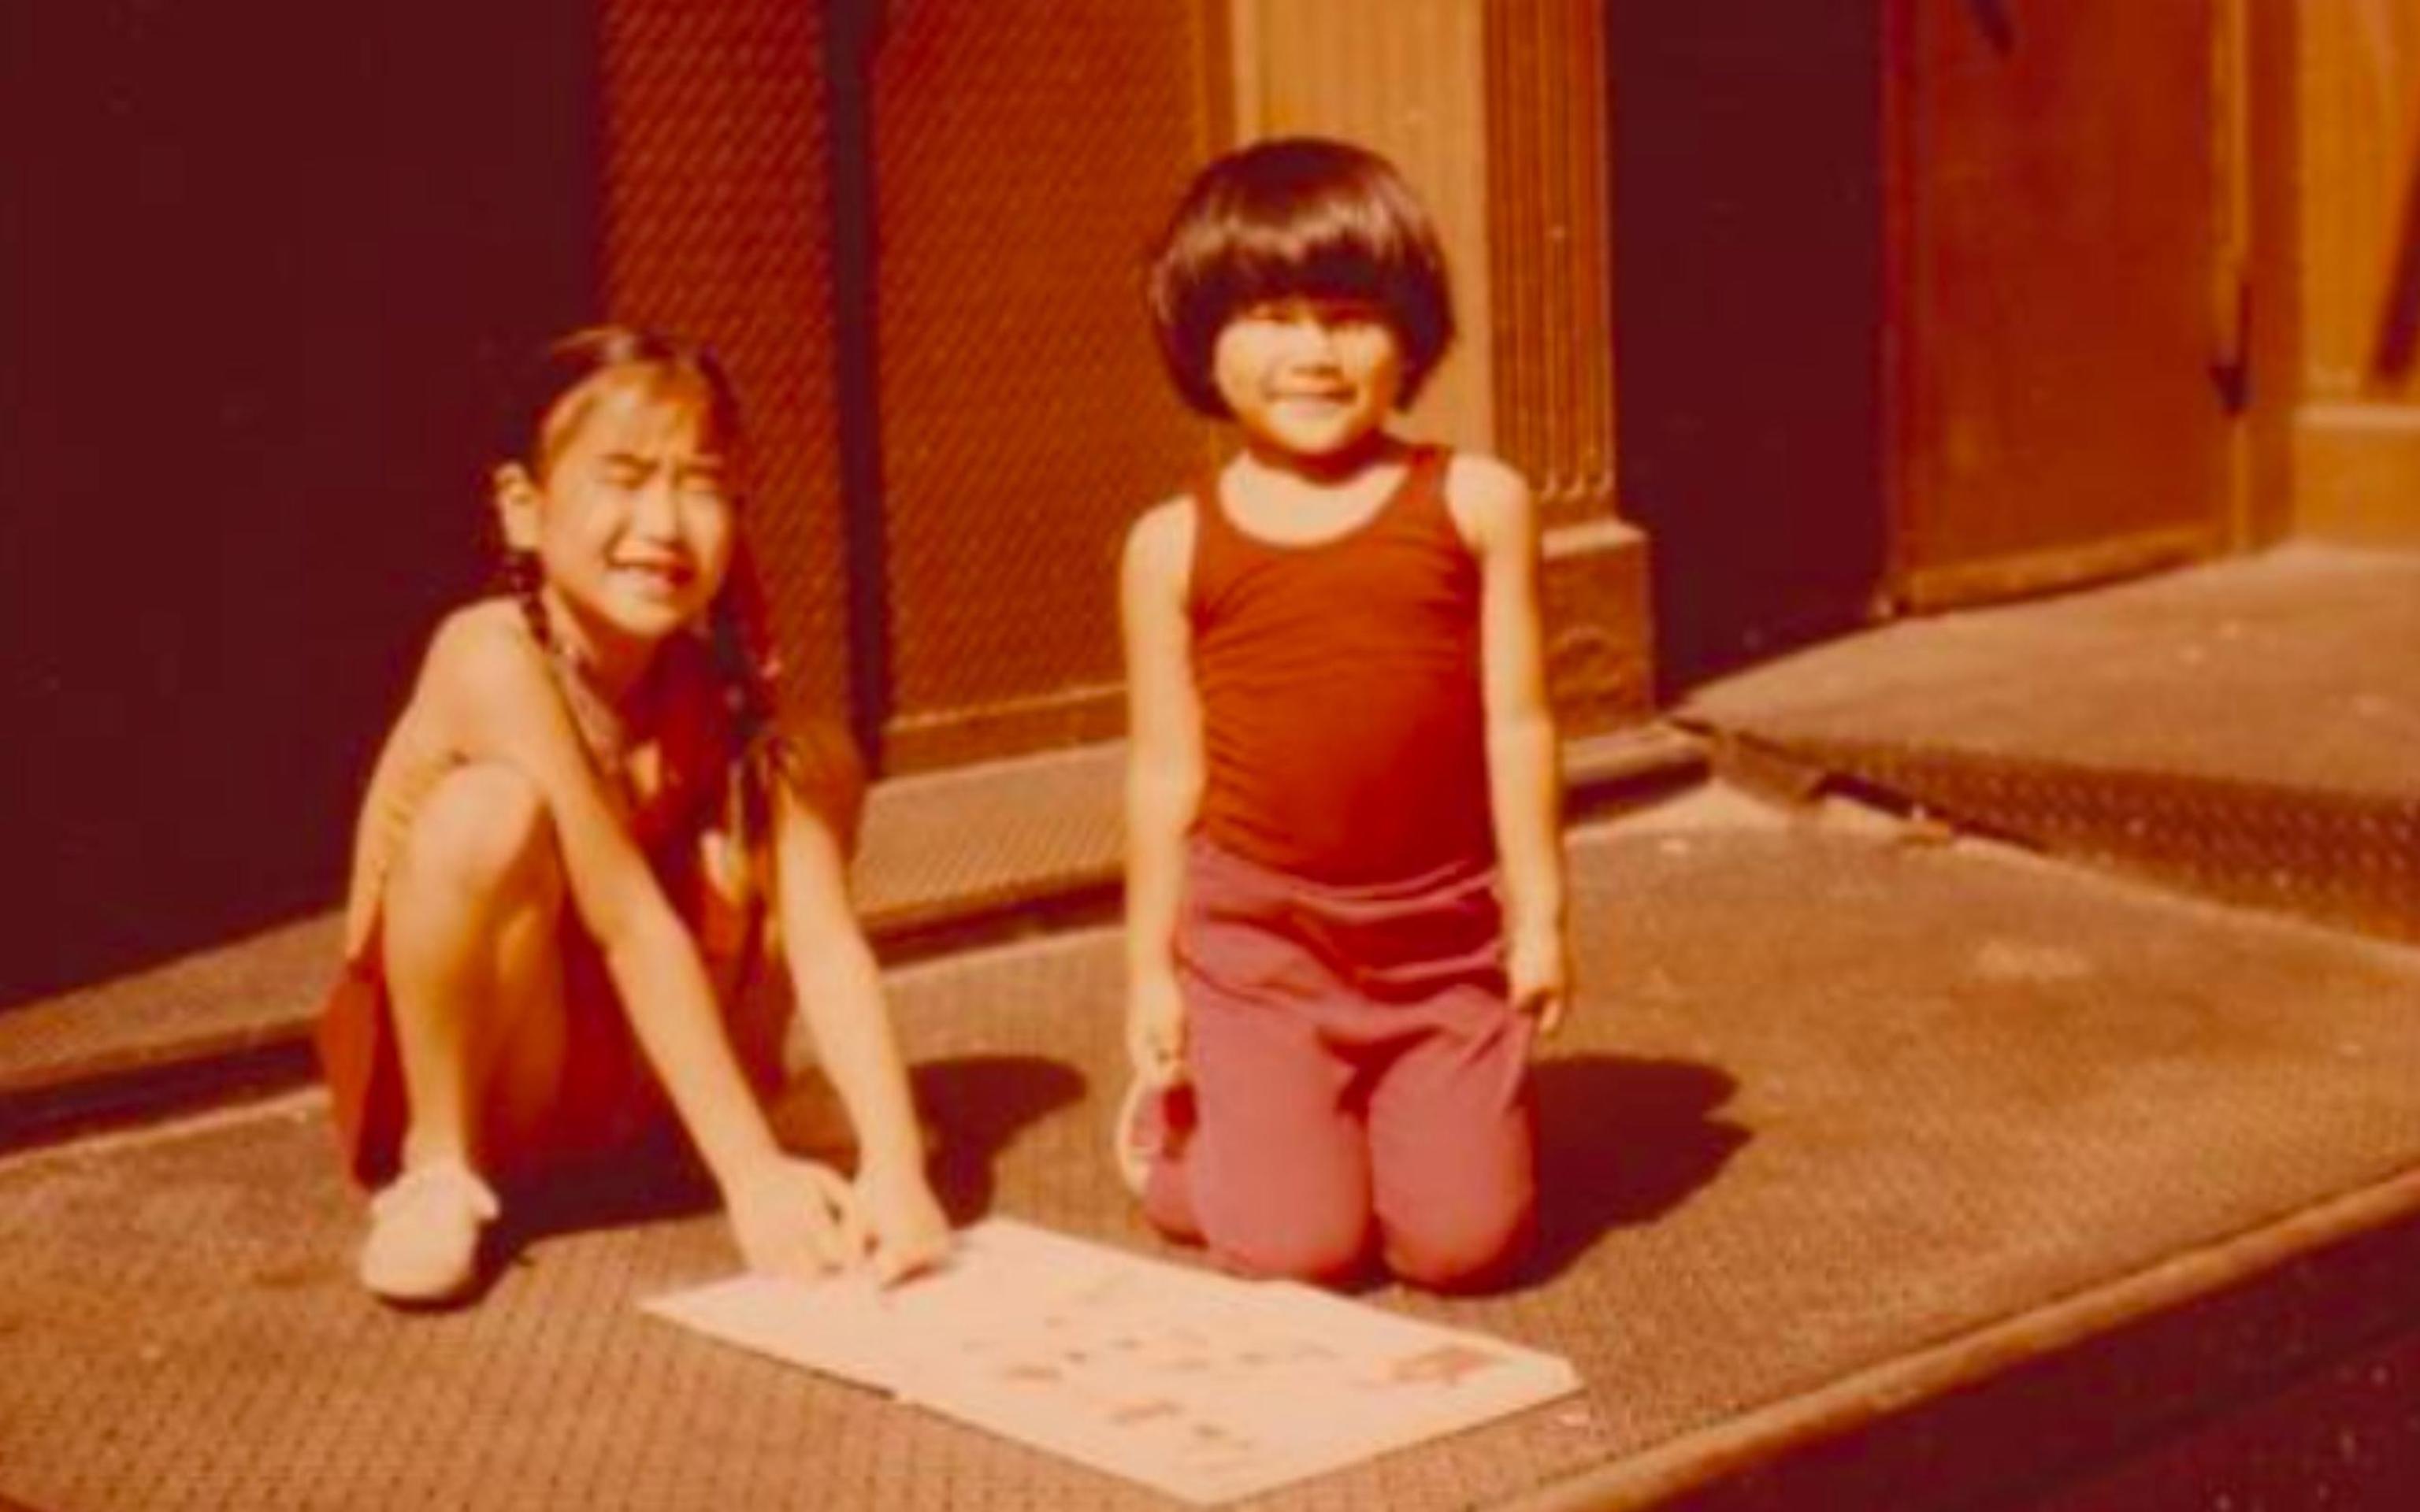 In the 1960s, SoHo was deserted. That's when my parents moved here.

I'm Yukie Ohta. My sister Mimi and I were born and raised in SoHo, and I still live here with my artist husband and our daughter. 

I want to show you my SoHo. We’ll trace signs of the past, and uncover hidden details only lifelong residents can show you.

PS - Bring a fridge magnet if you have one handy!

This walk was created in the summer of 2021.